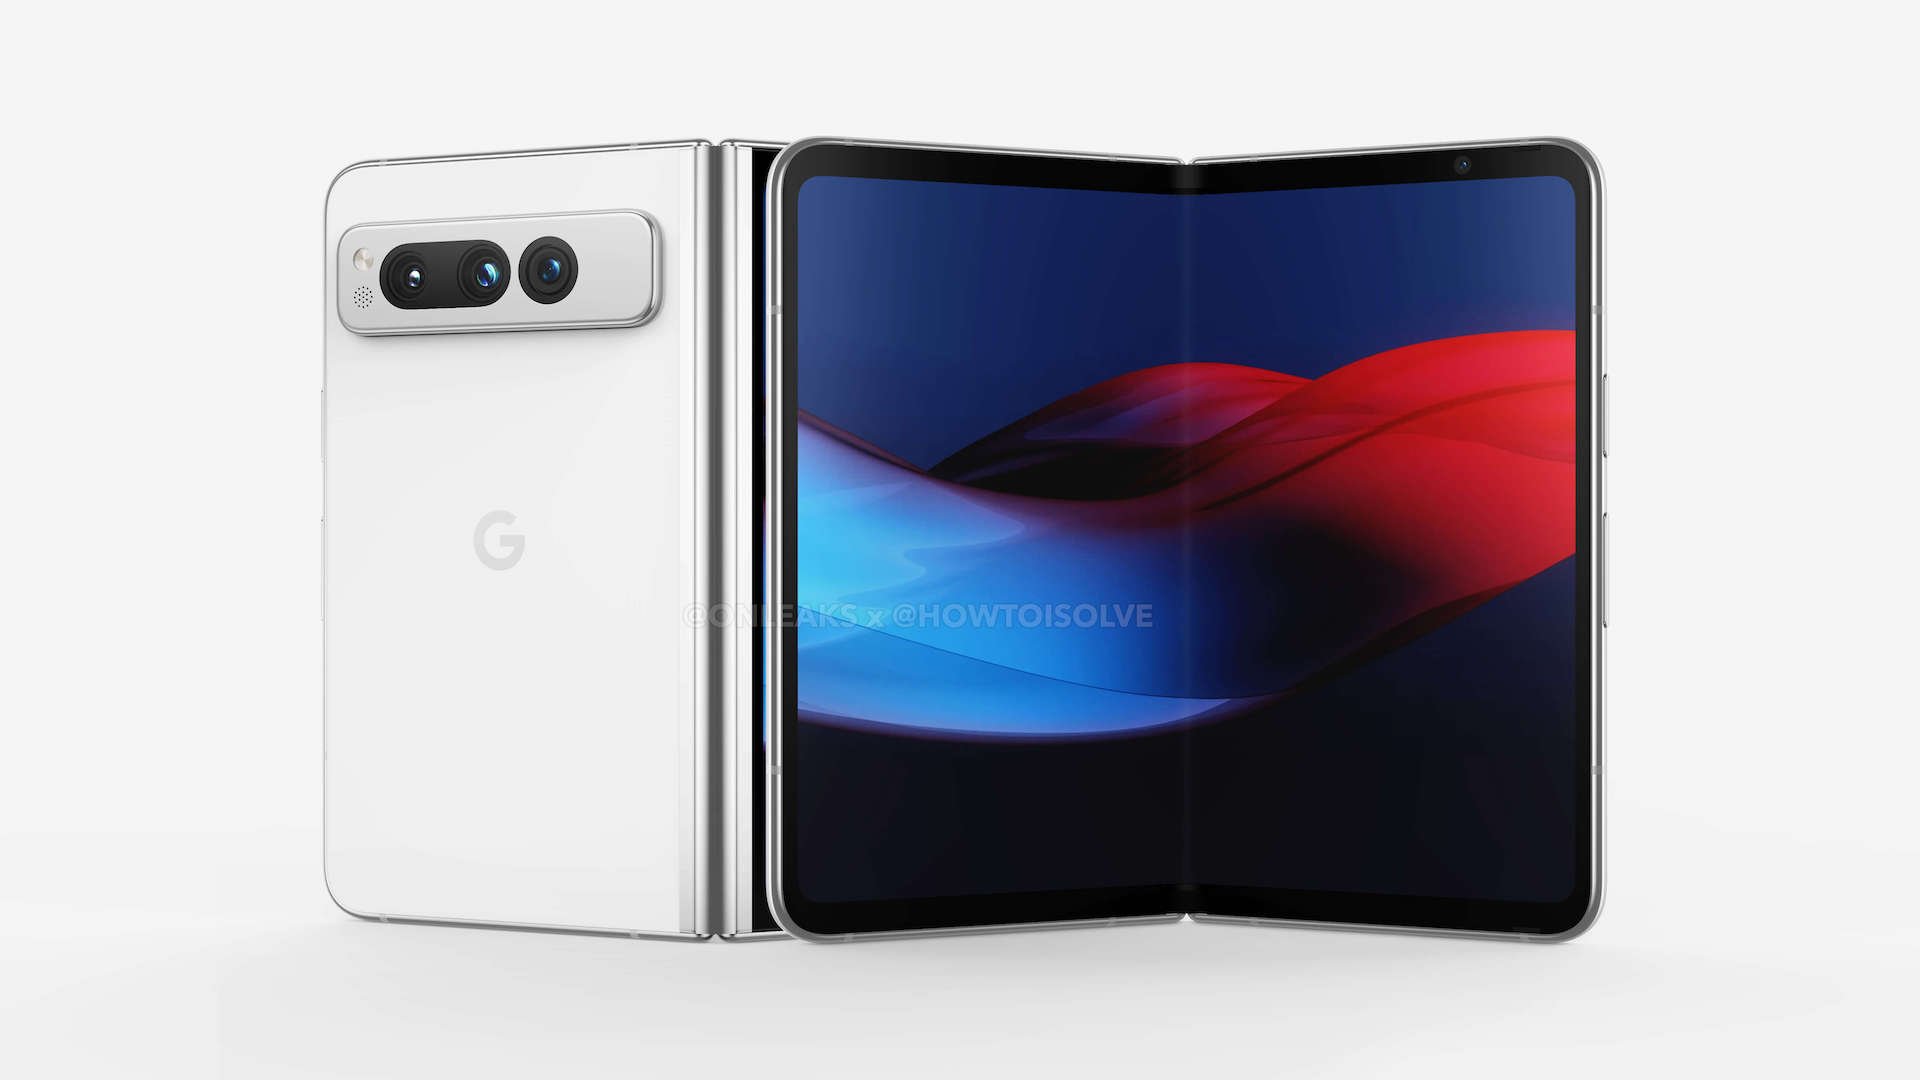 Renders of the foldable Google Pixel Fold smartphone have been found